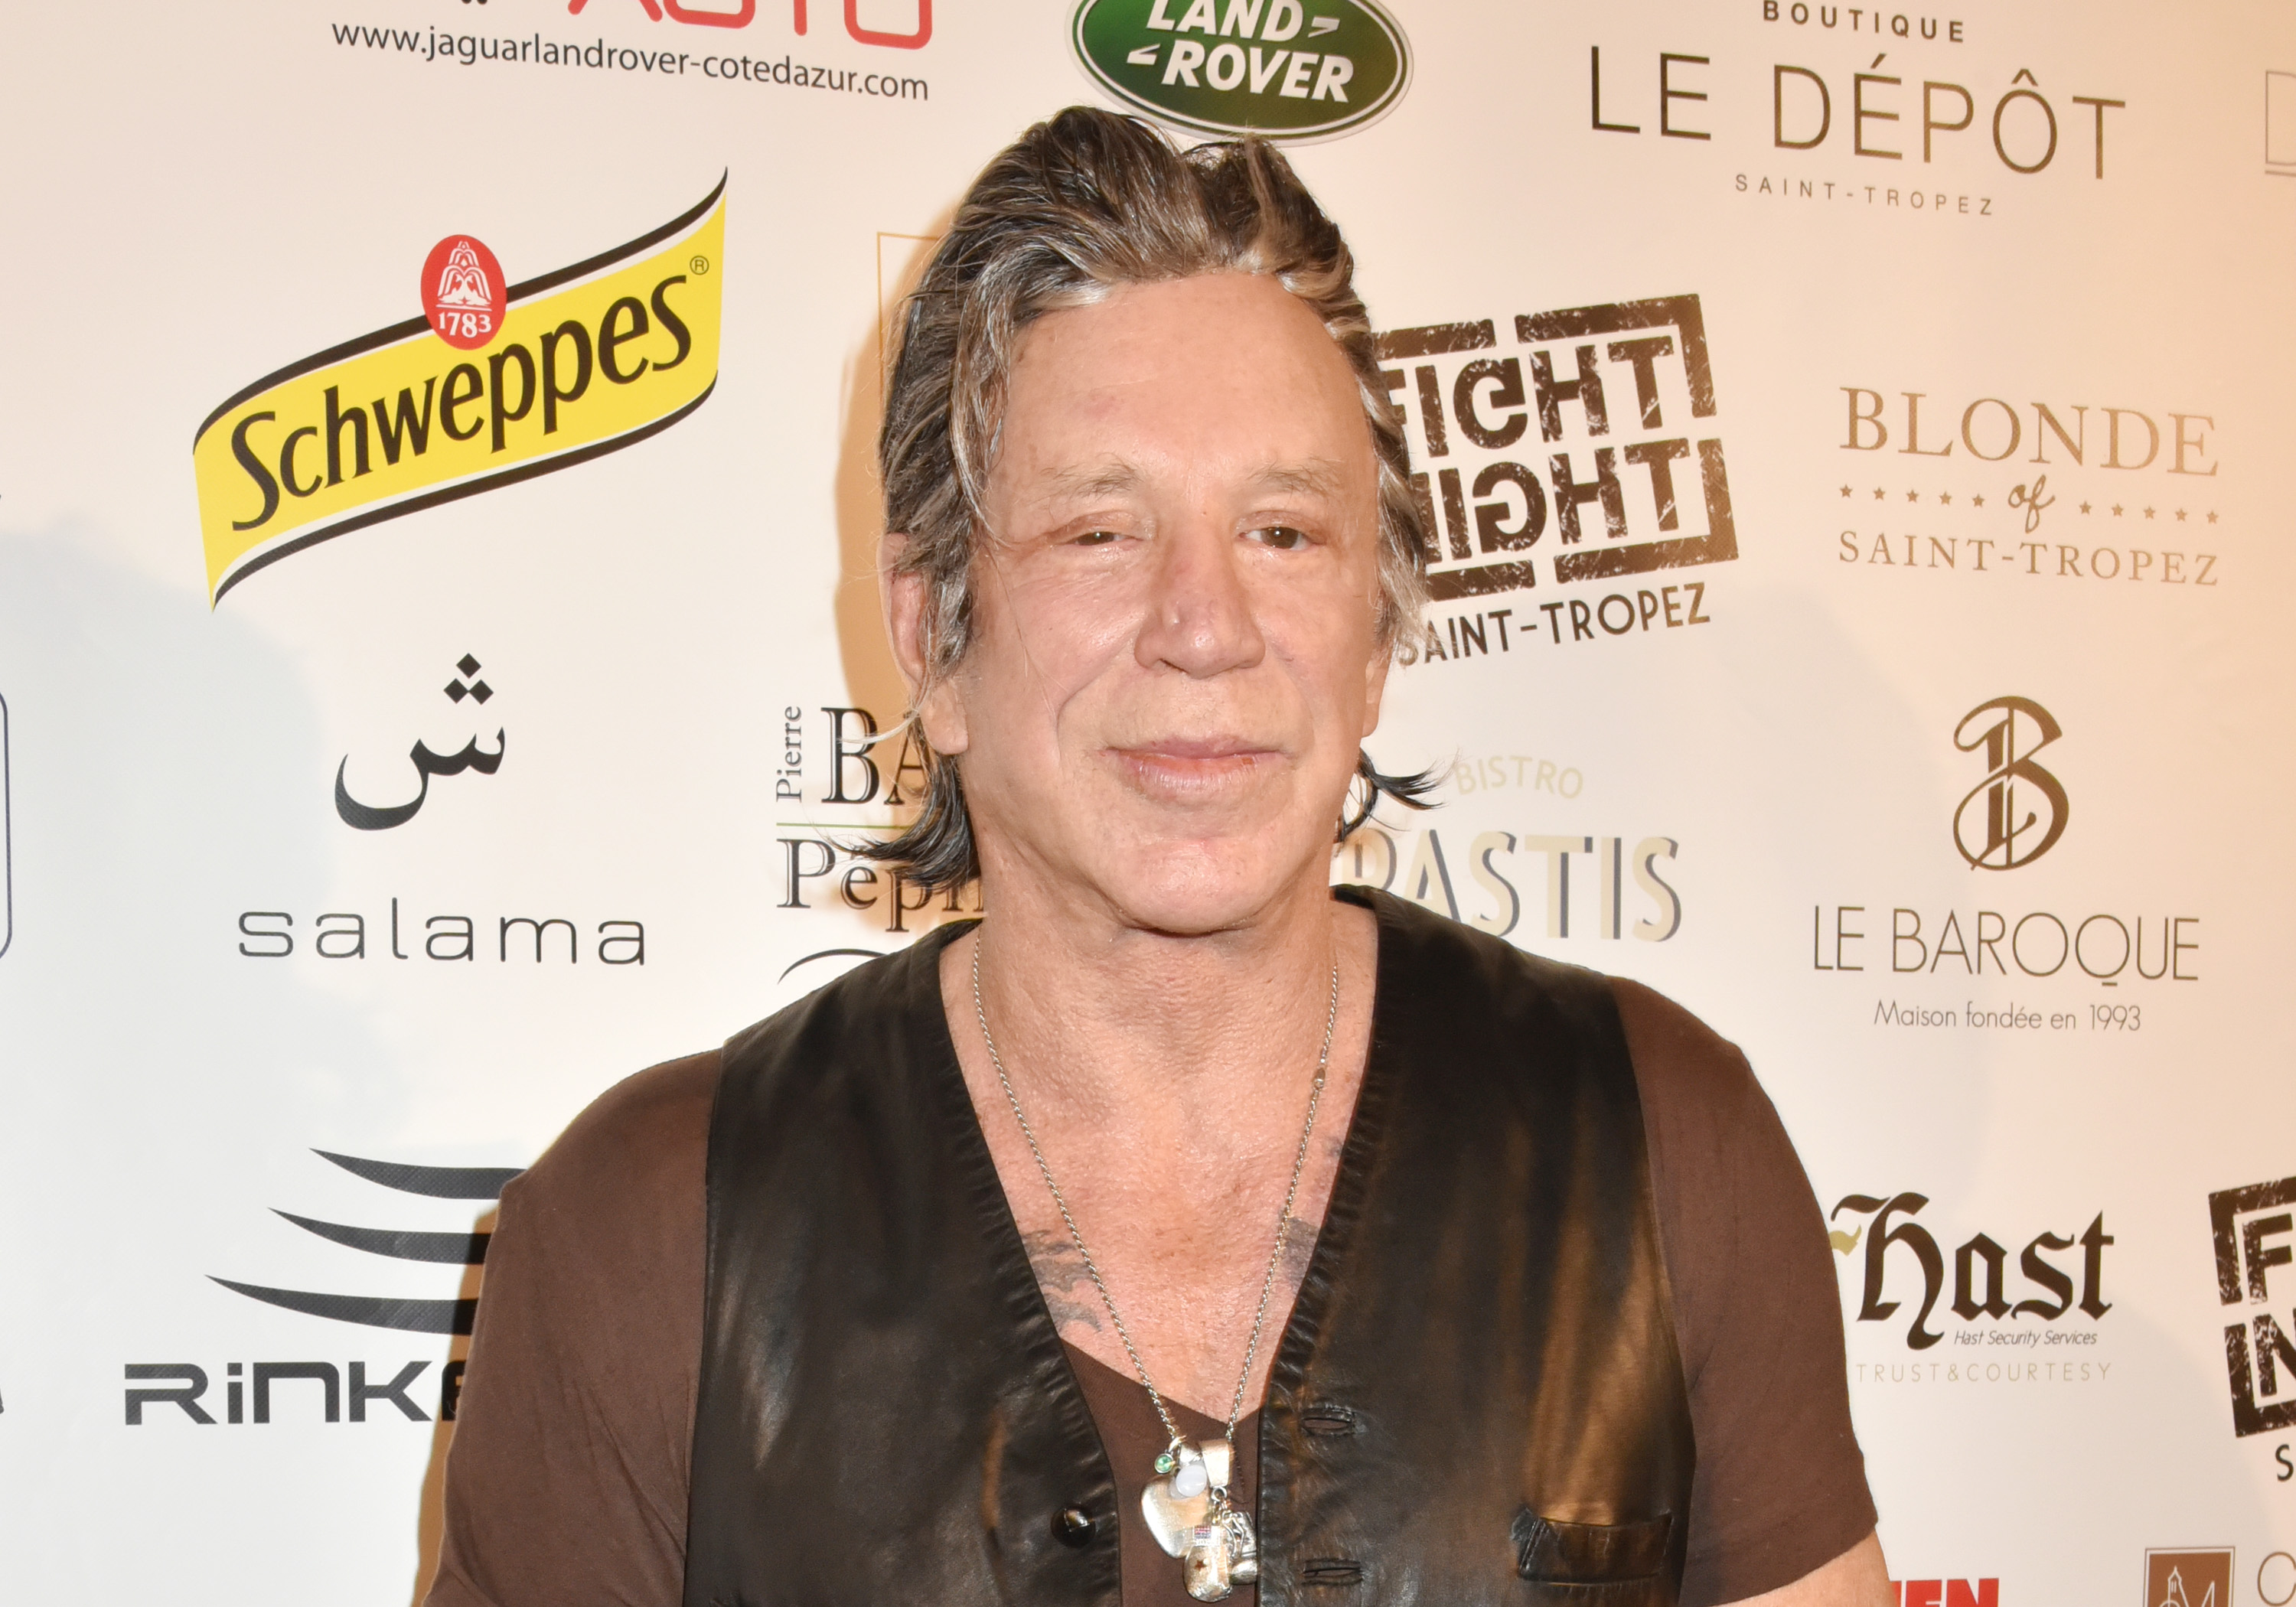 Mickey Rourke attends the "Fight Night 2016" : Gala At La Citadelle on August 4, 2016 in Saint-Tropez, France. | Source: Getty Images